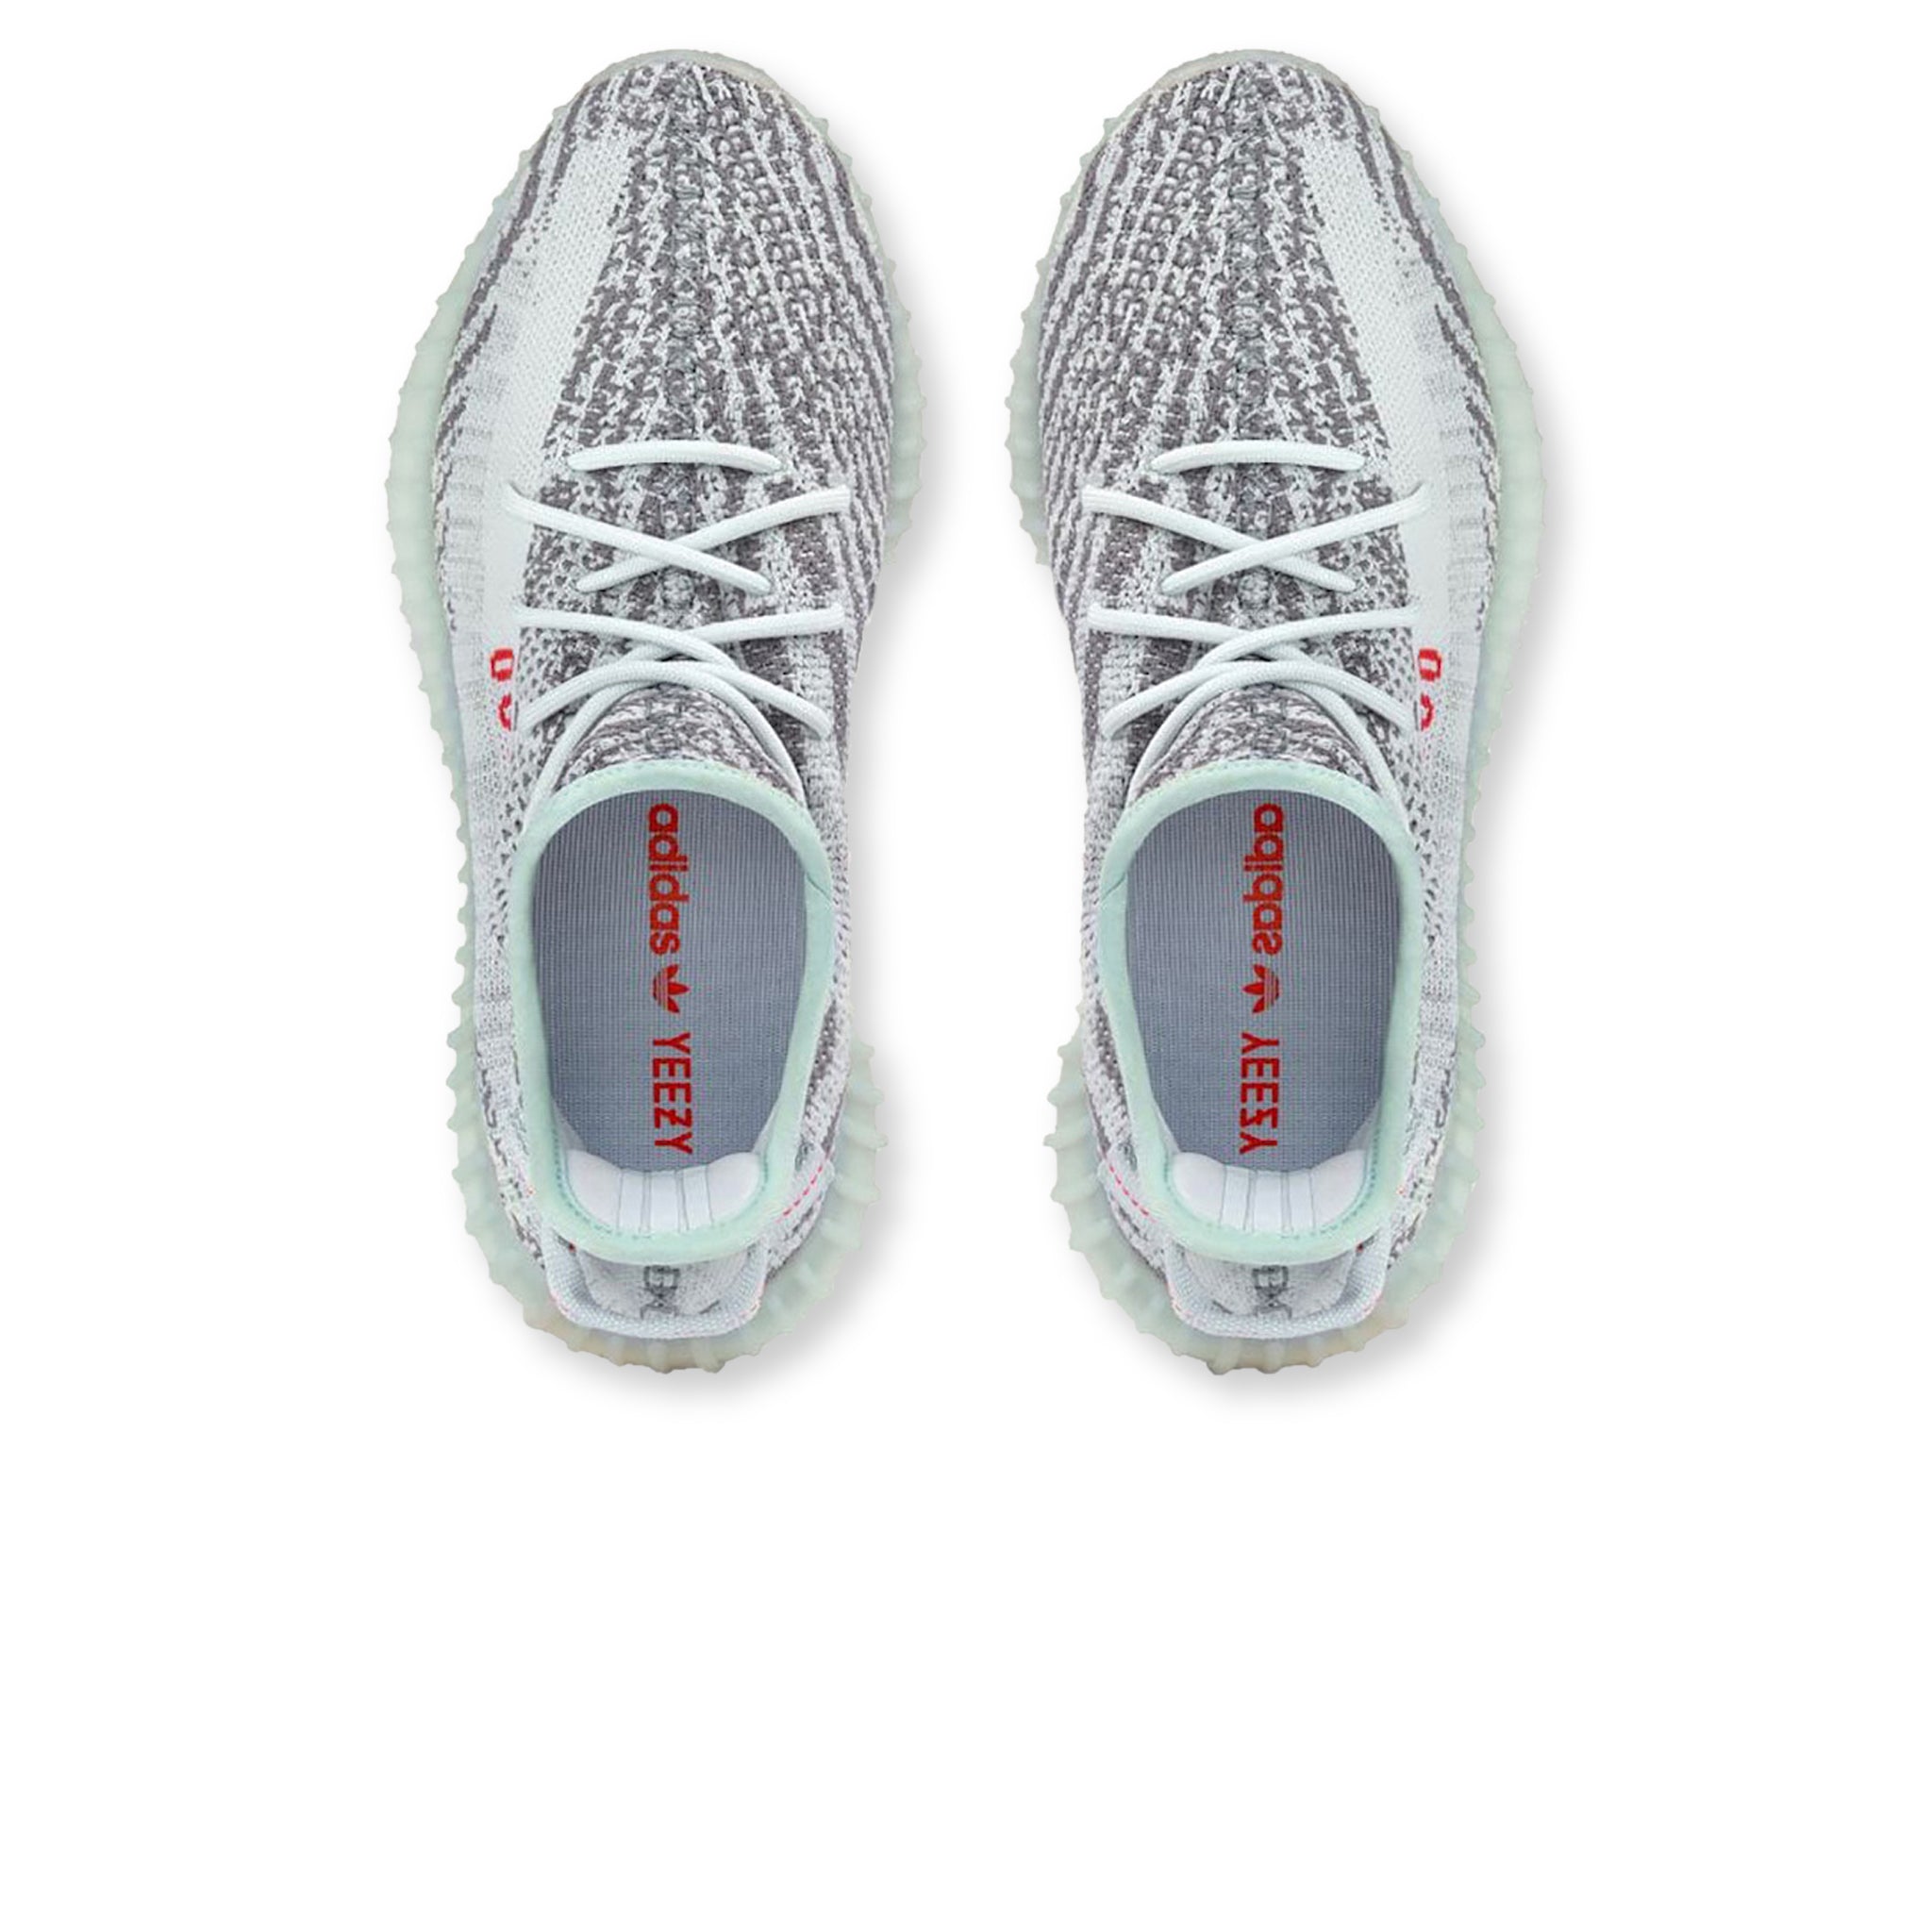 Top down view of Adidas Yeezy Boost 350 V2 Blue Tint B37571